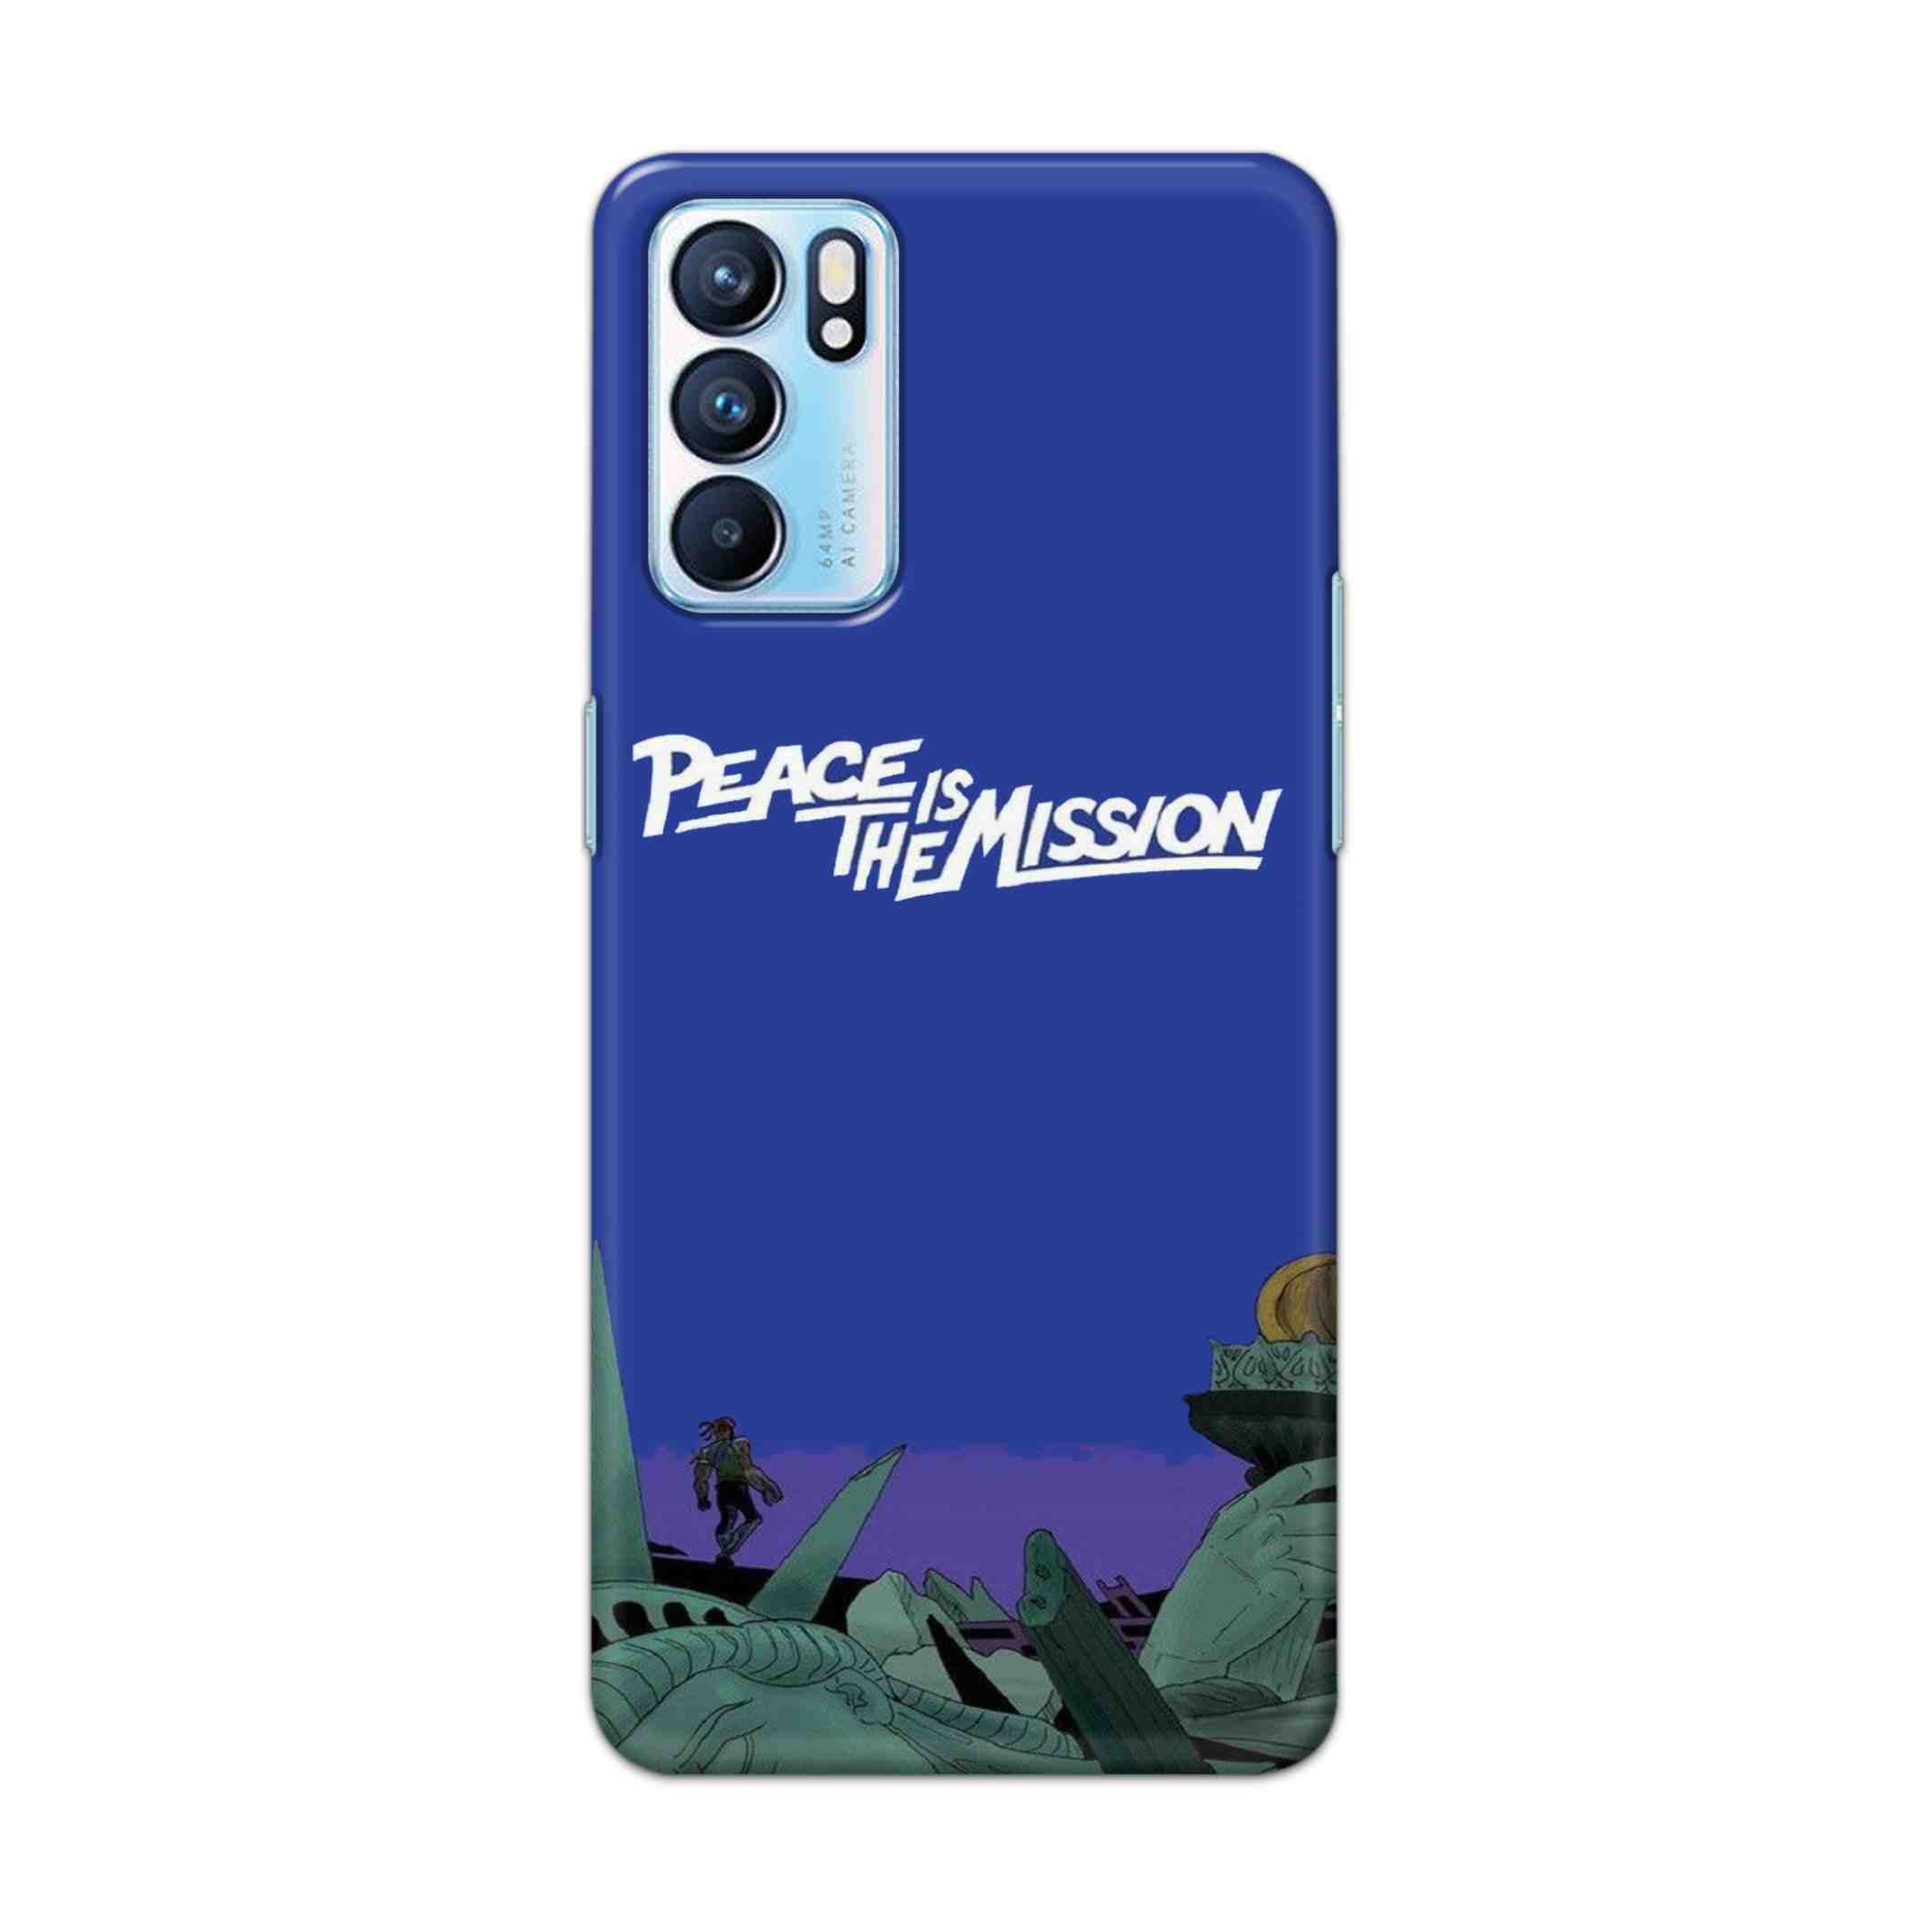 Buy Peace Is The Misson Hard Back Mobile Phone Case Cover For OPPO RENO 6 Online